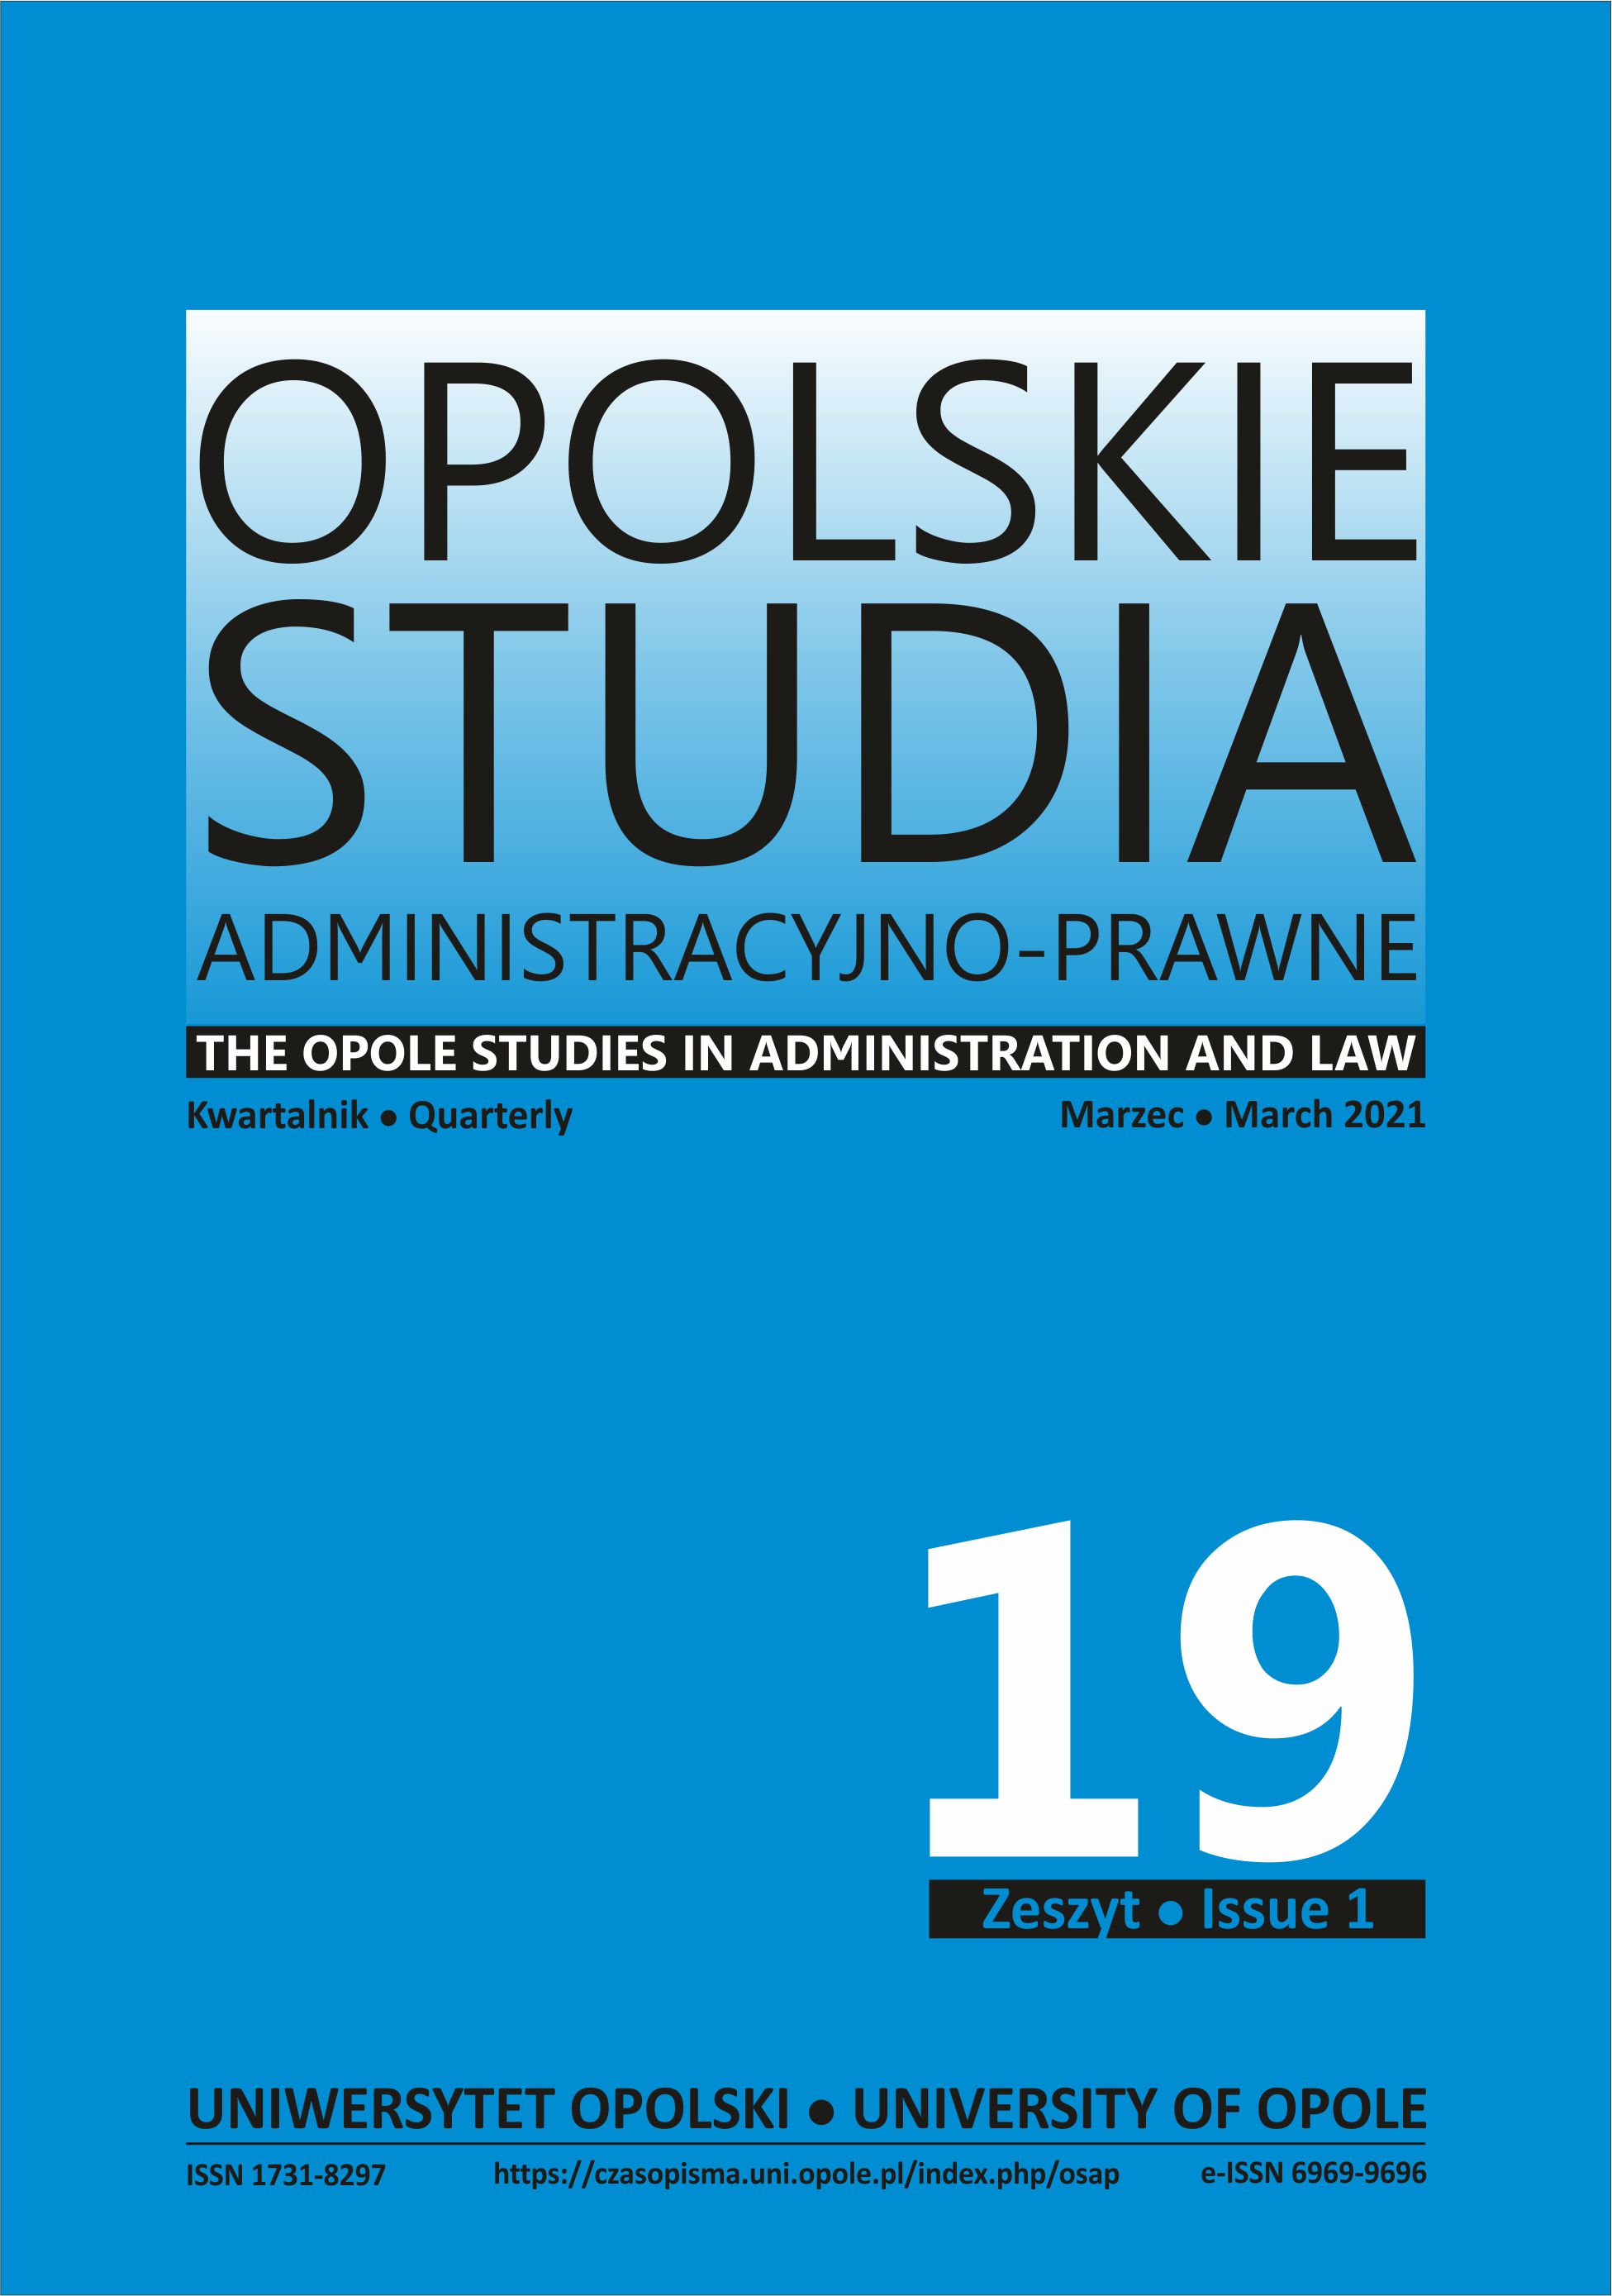 Gloss to the Supreme Administrative Court Judgment of 24 January 2018 (II OSK 878/16) Cover Image